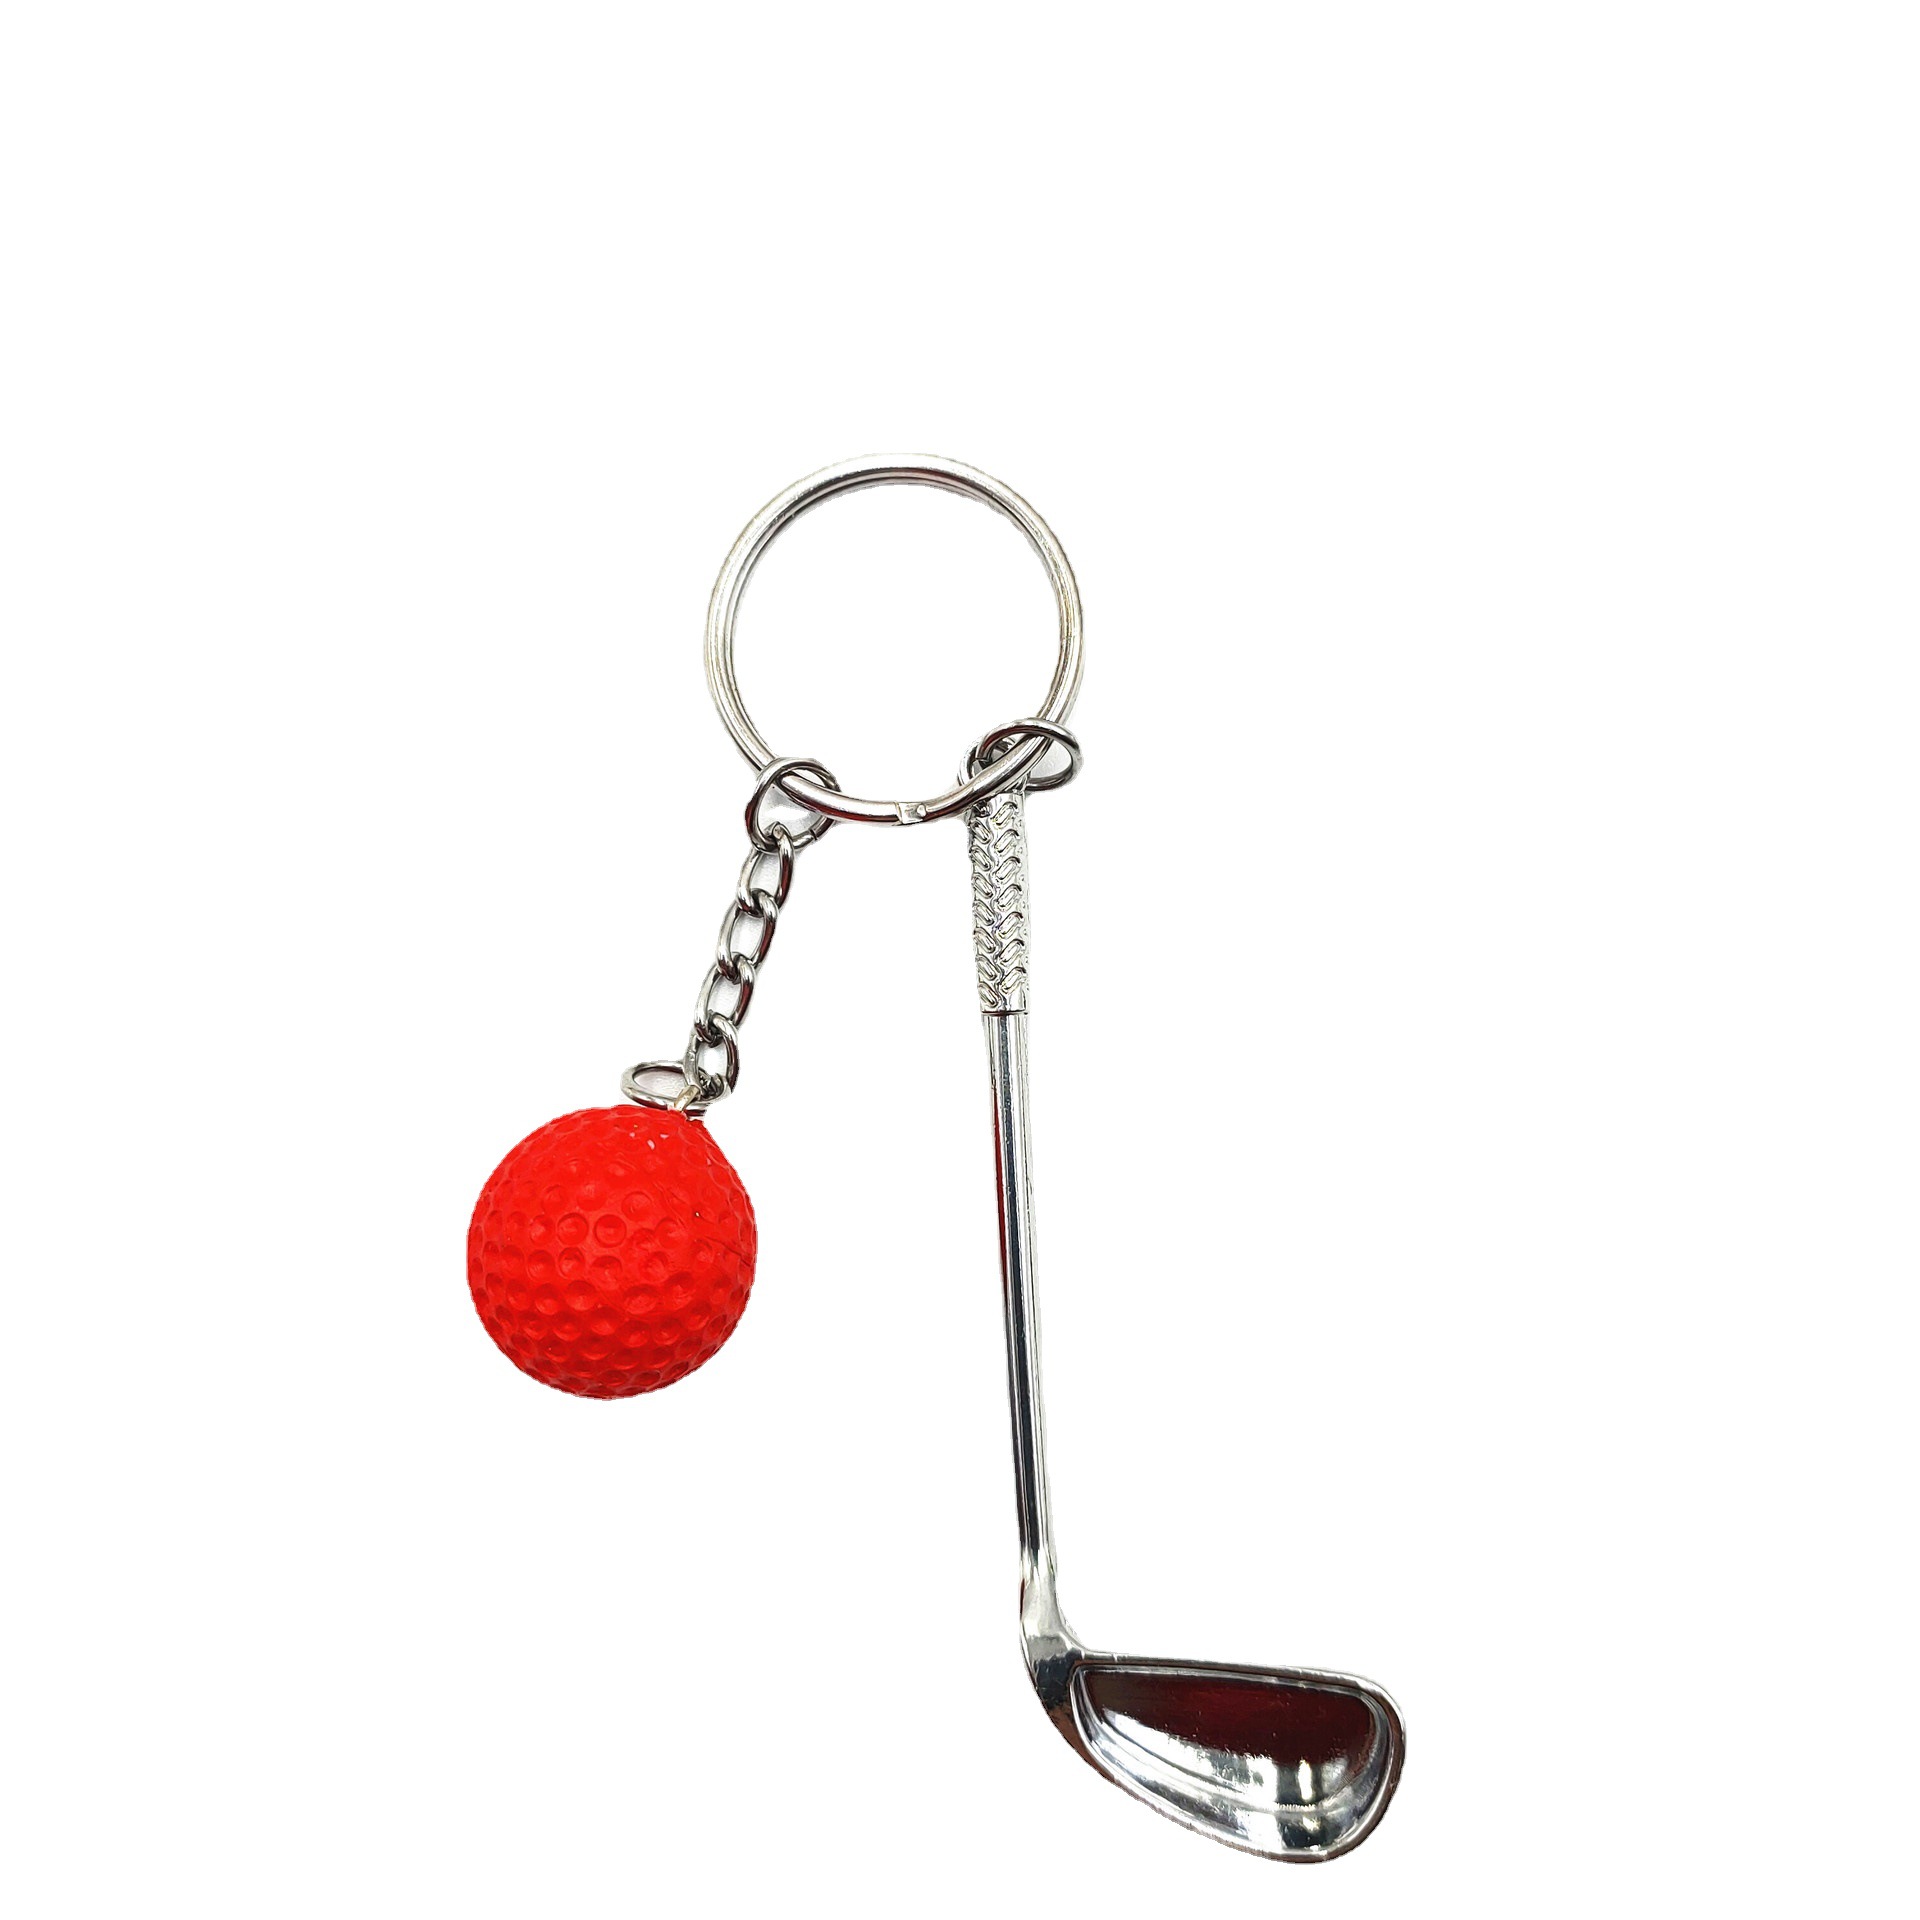 

Keychains Golf Ball Key Chain Top Grade Metal Keychain Car Ring Sporting Goods Sports Gift For Souvenir RingKeychains